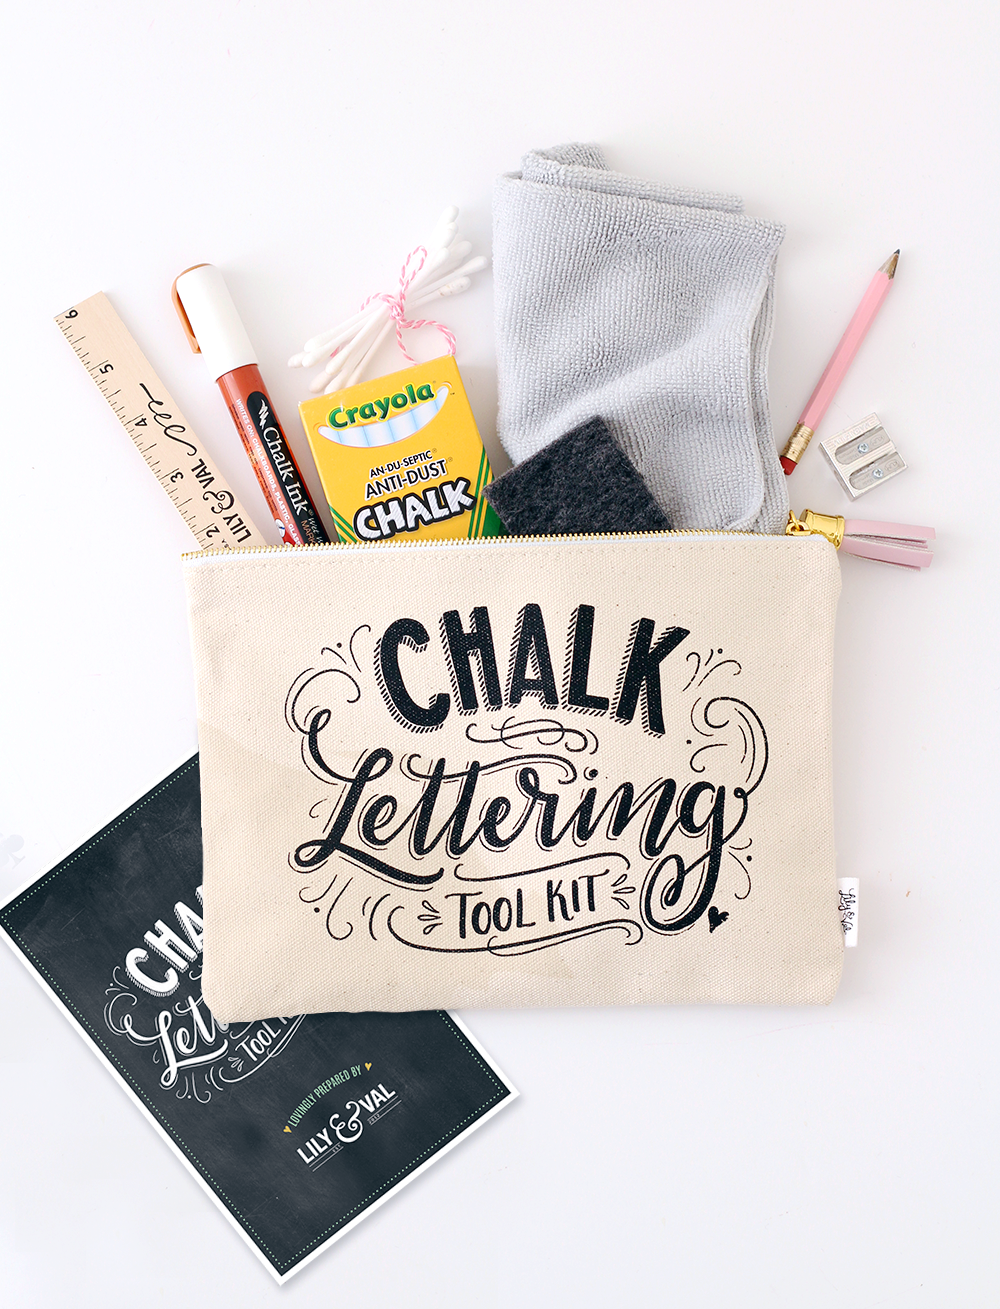 Chalk Lettering Tool Kit: Winner of the Best New Product Award At National Stationery Show